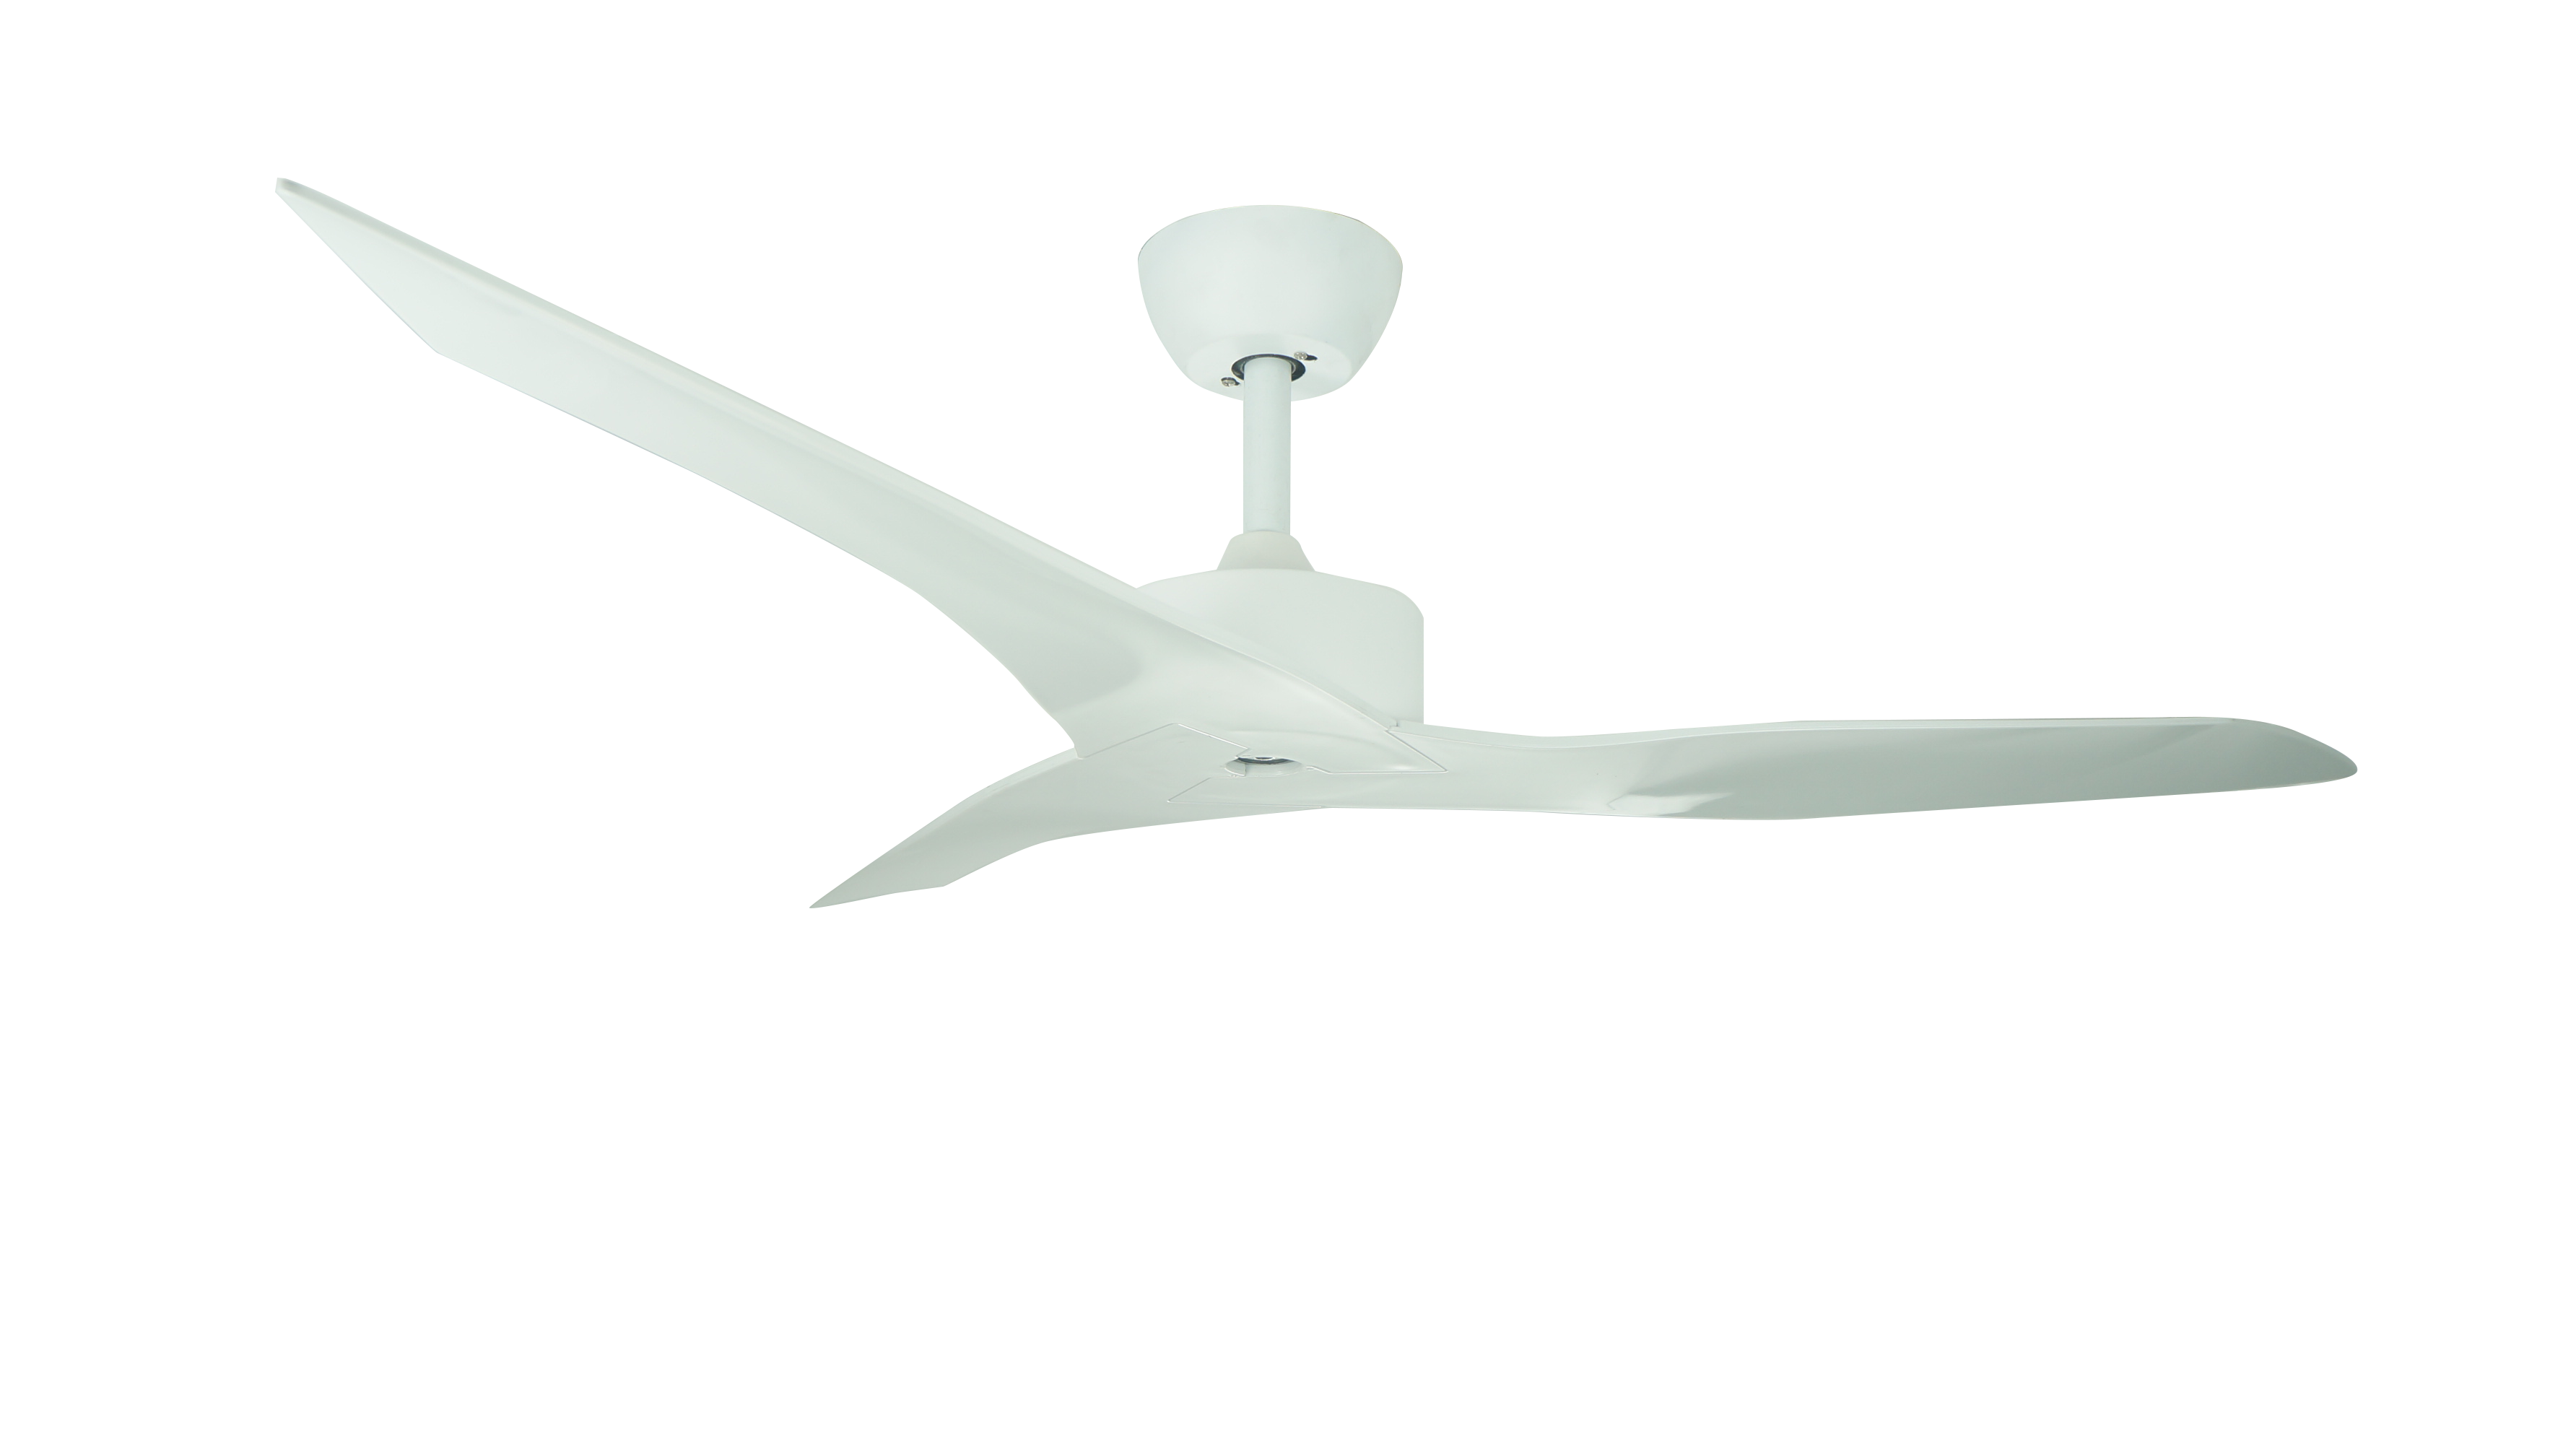 Ceiling Fan Remote - How to Get the Most Out of Your Ceiling Fan Remote